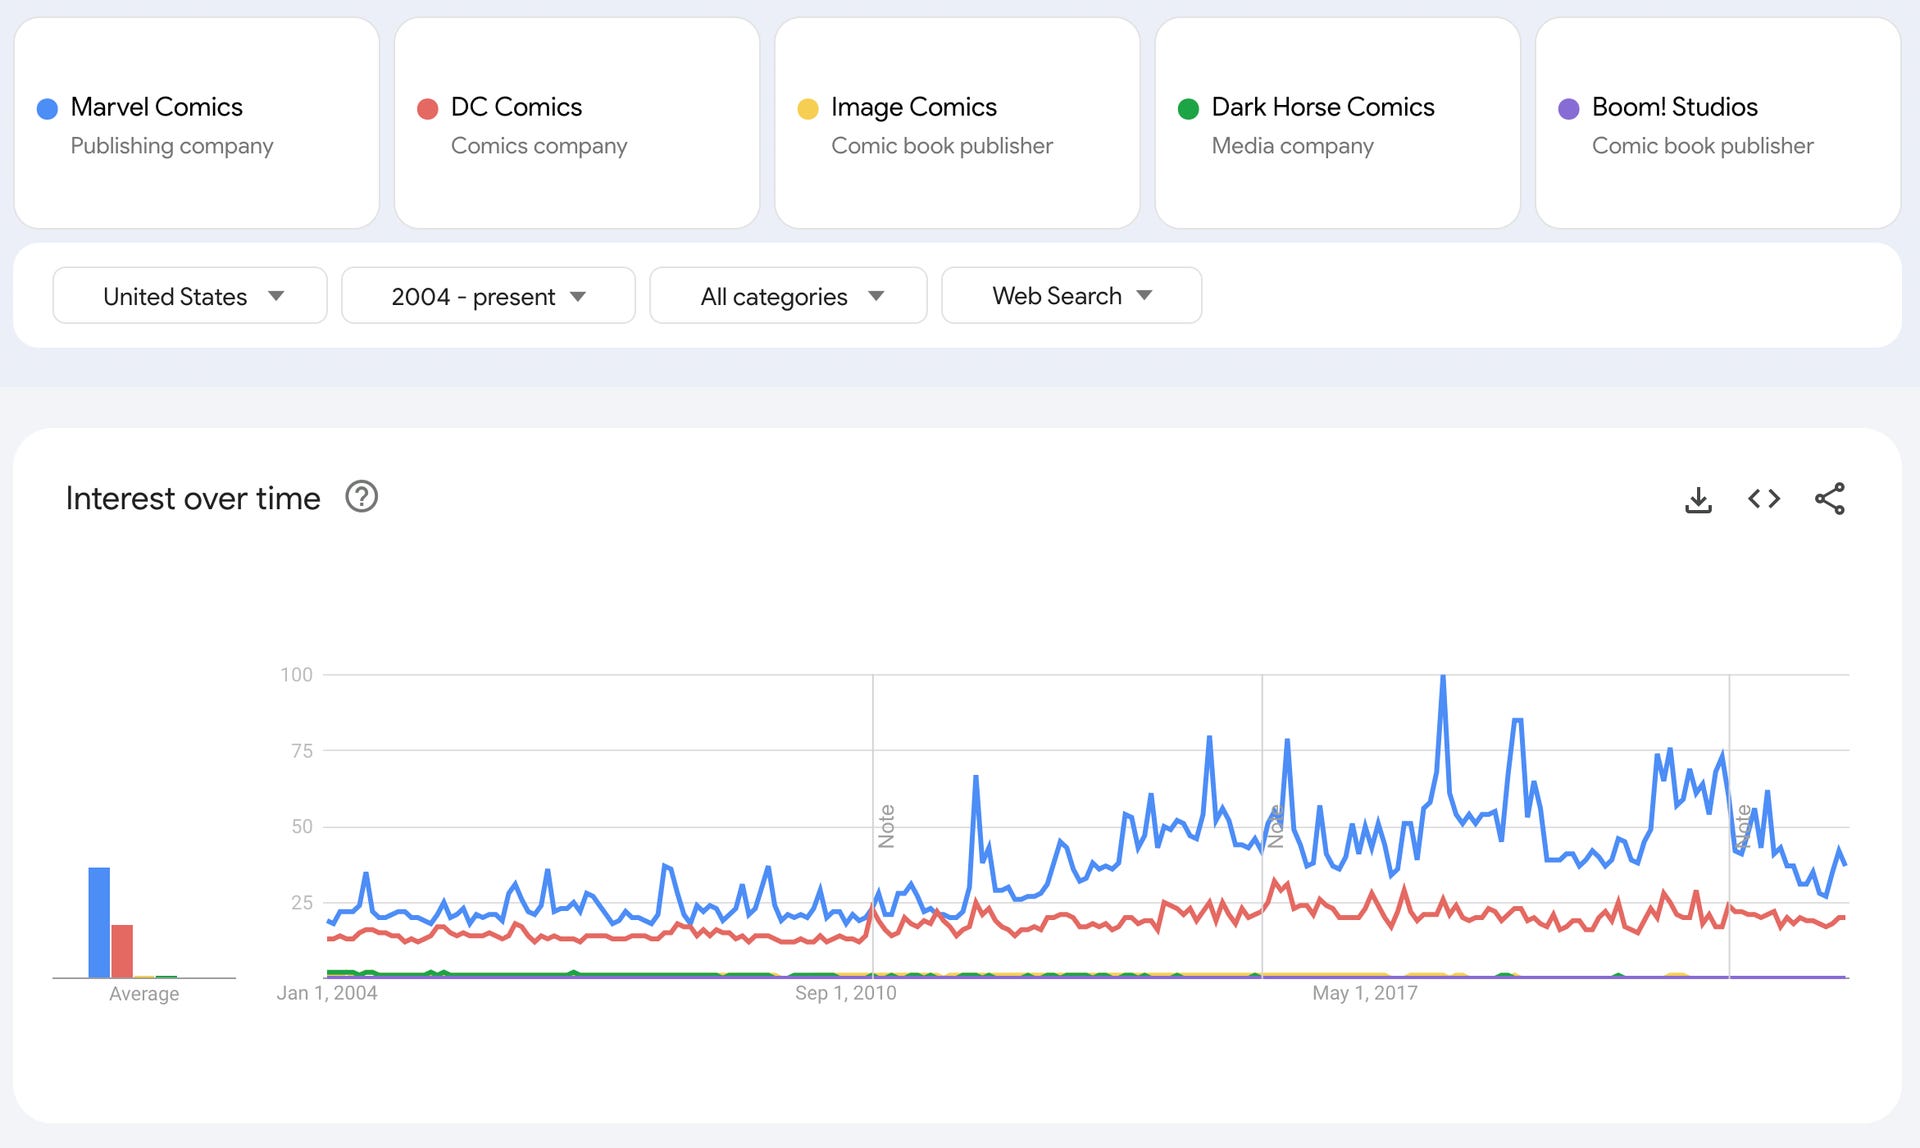 Line graphs showing the search trends for the comics publishers Marvel, DC, Image, Dark Horse and Boom! Studios.